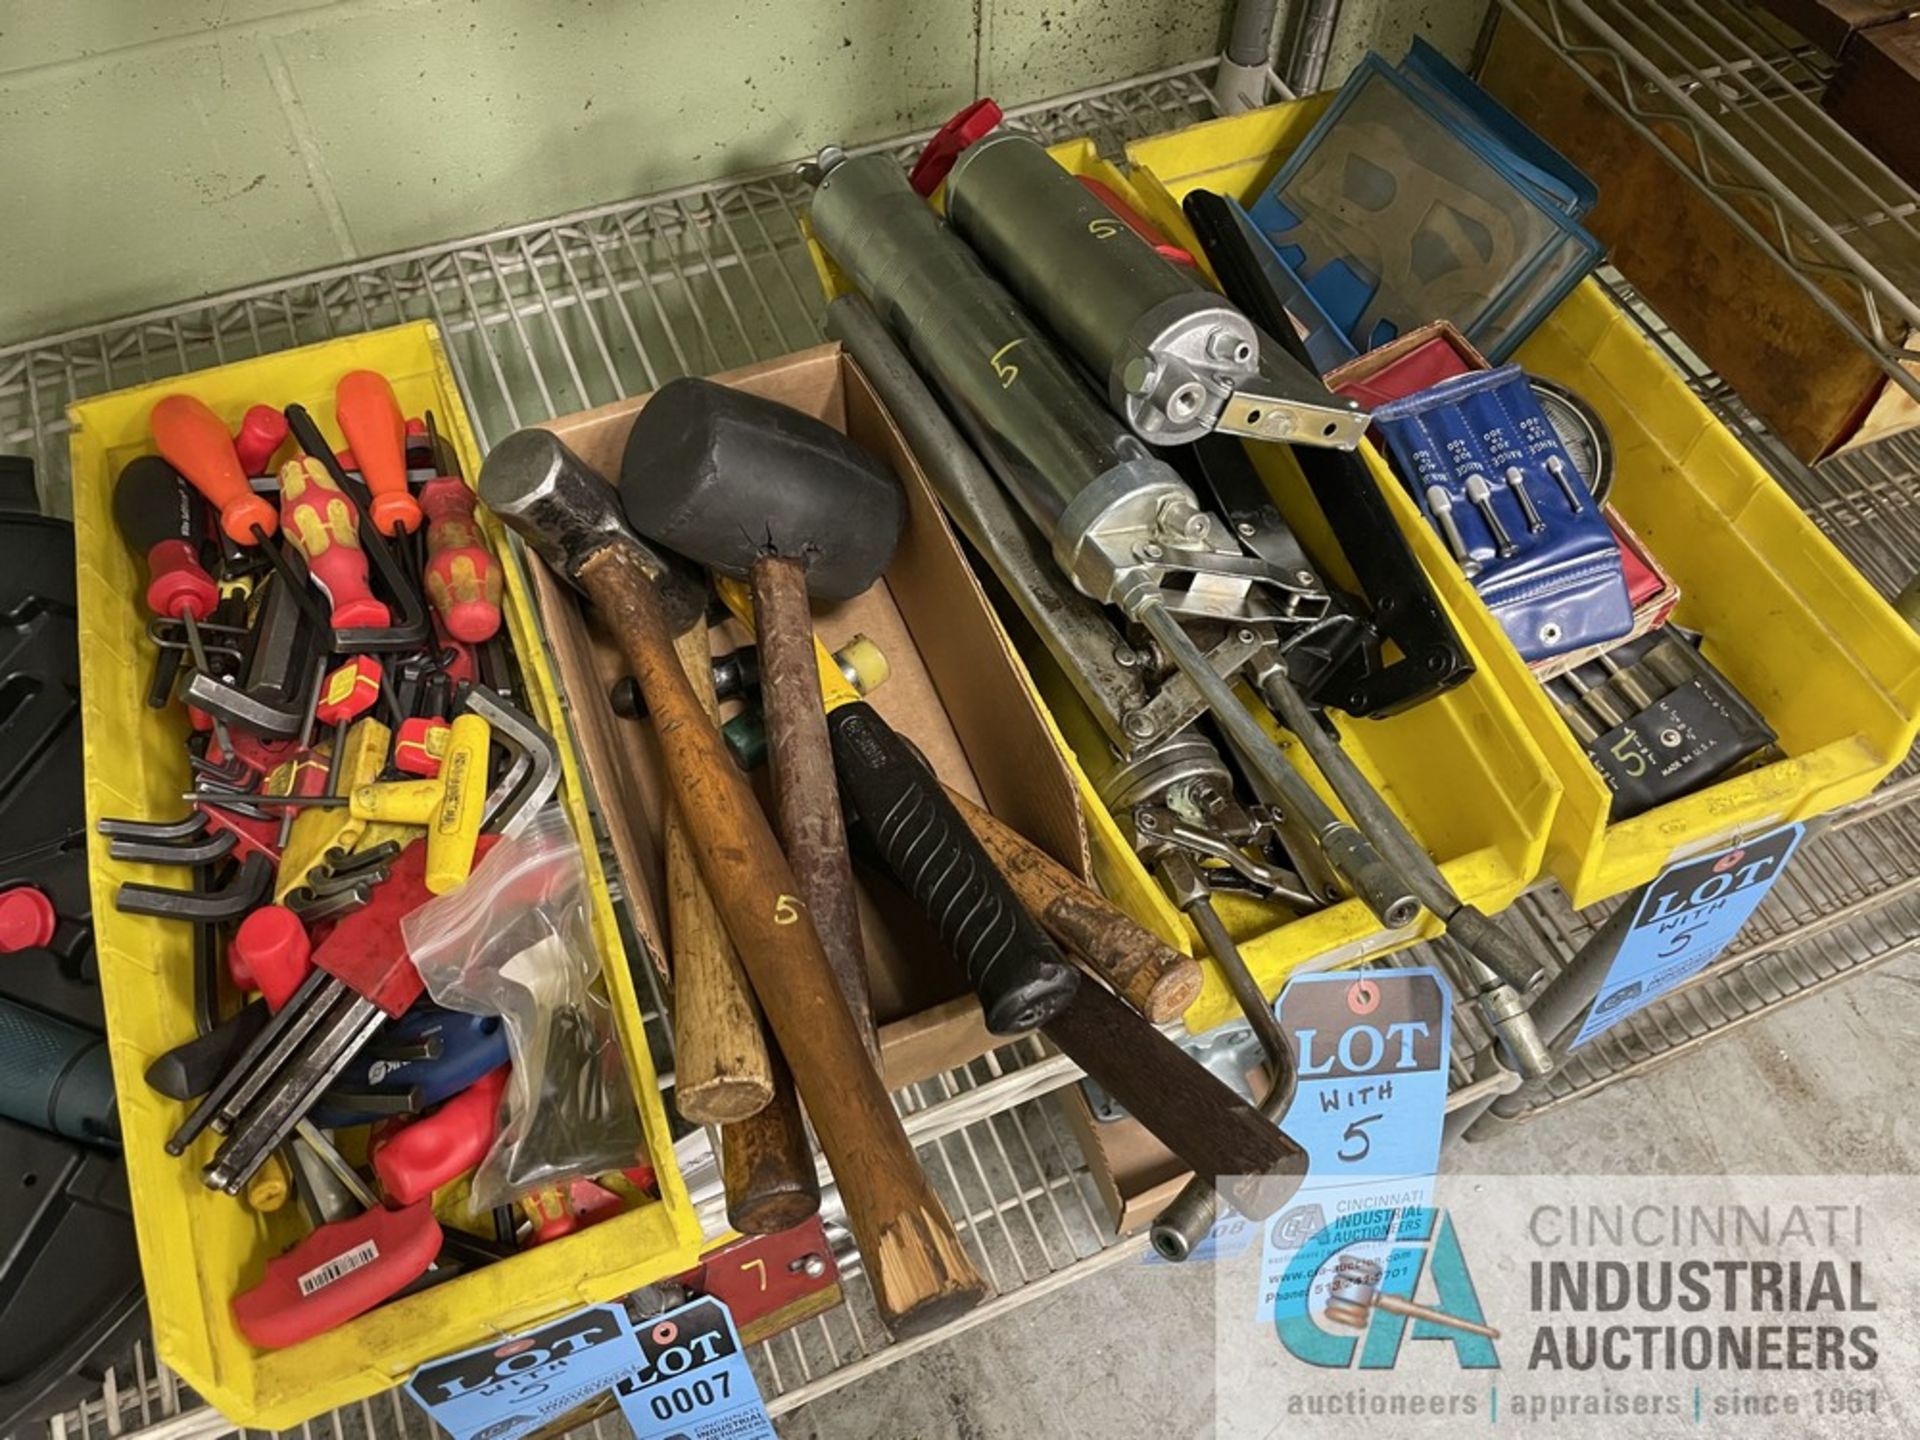 (LOT) ASSORTED TOOLS & 2ND SHELF; HOLE SAWS, MALLETS, GREASE GUNS & OTHERS - Image 4 of 4